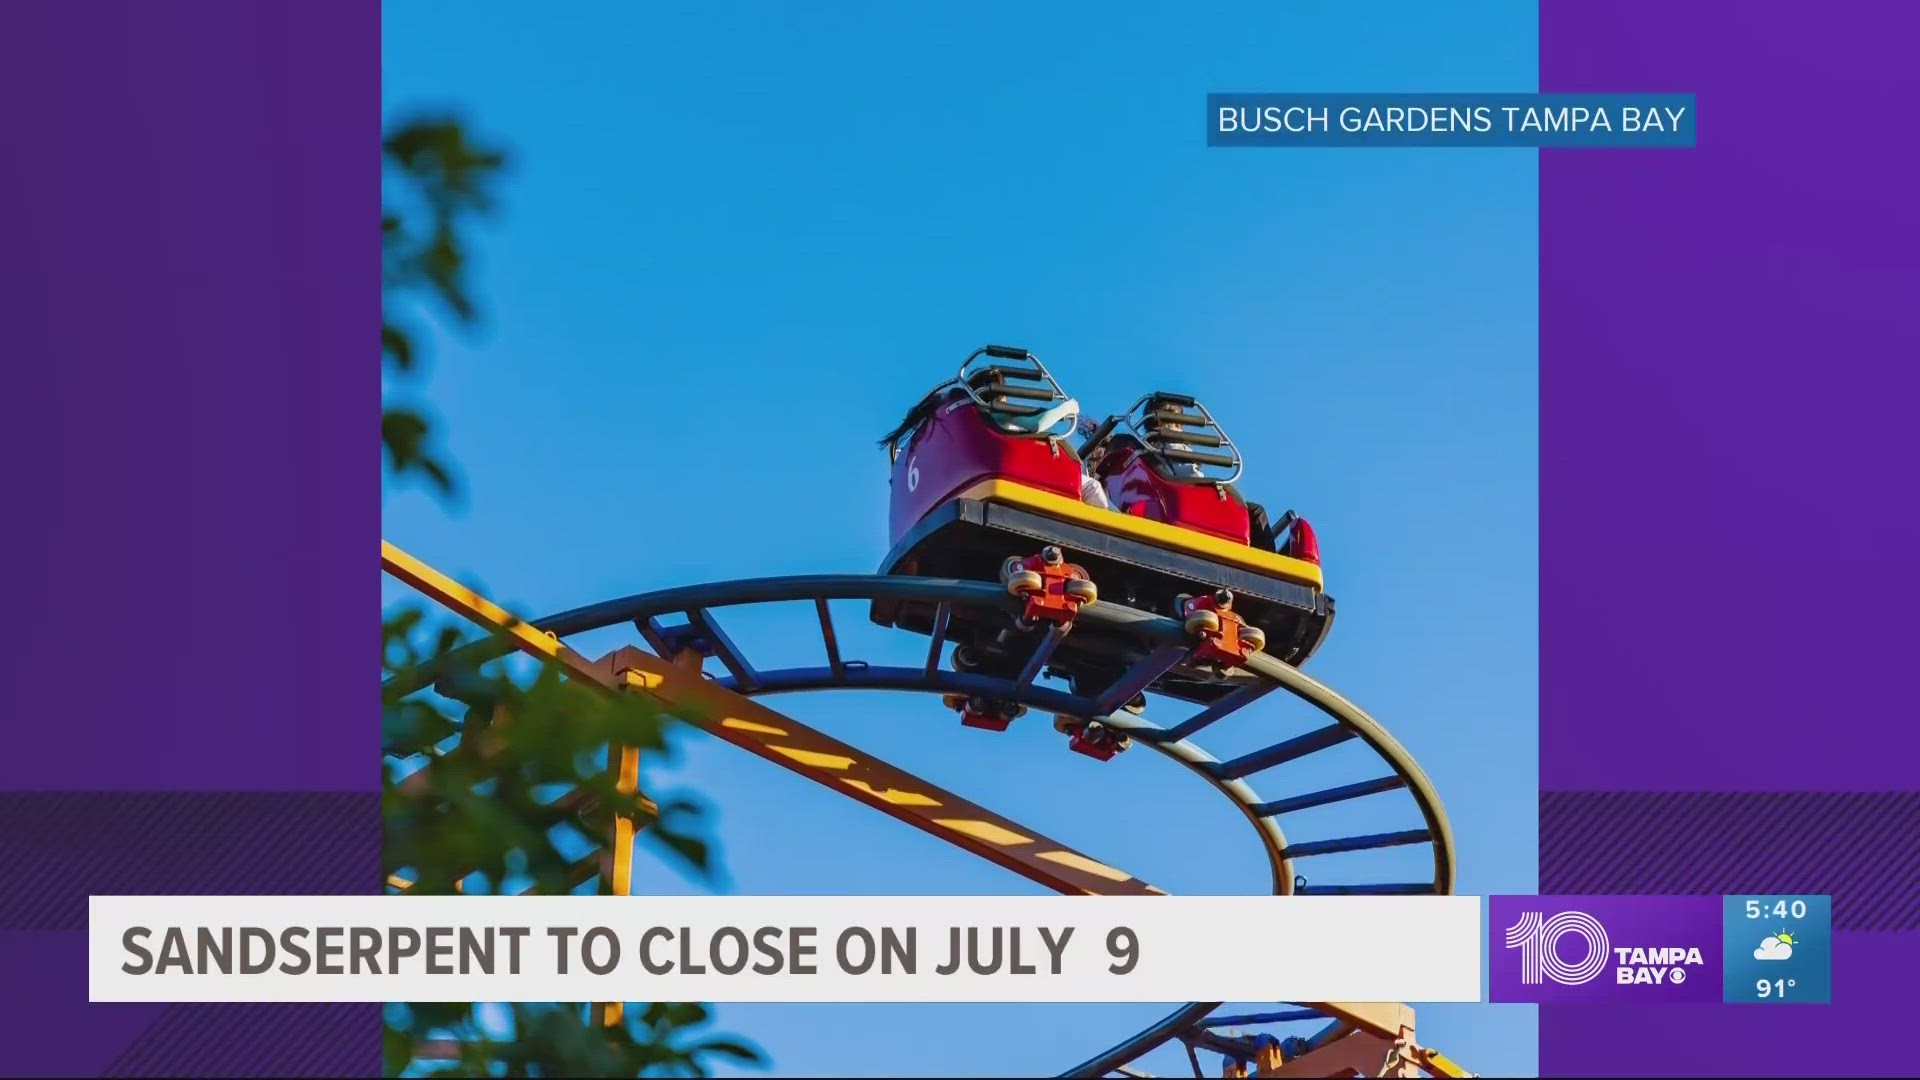 Park officials say guests have until July 9 to ride the 5-story-tall one last time before it's permanently gone.